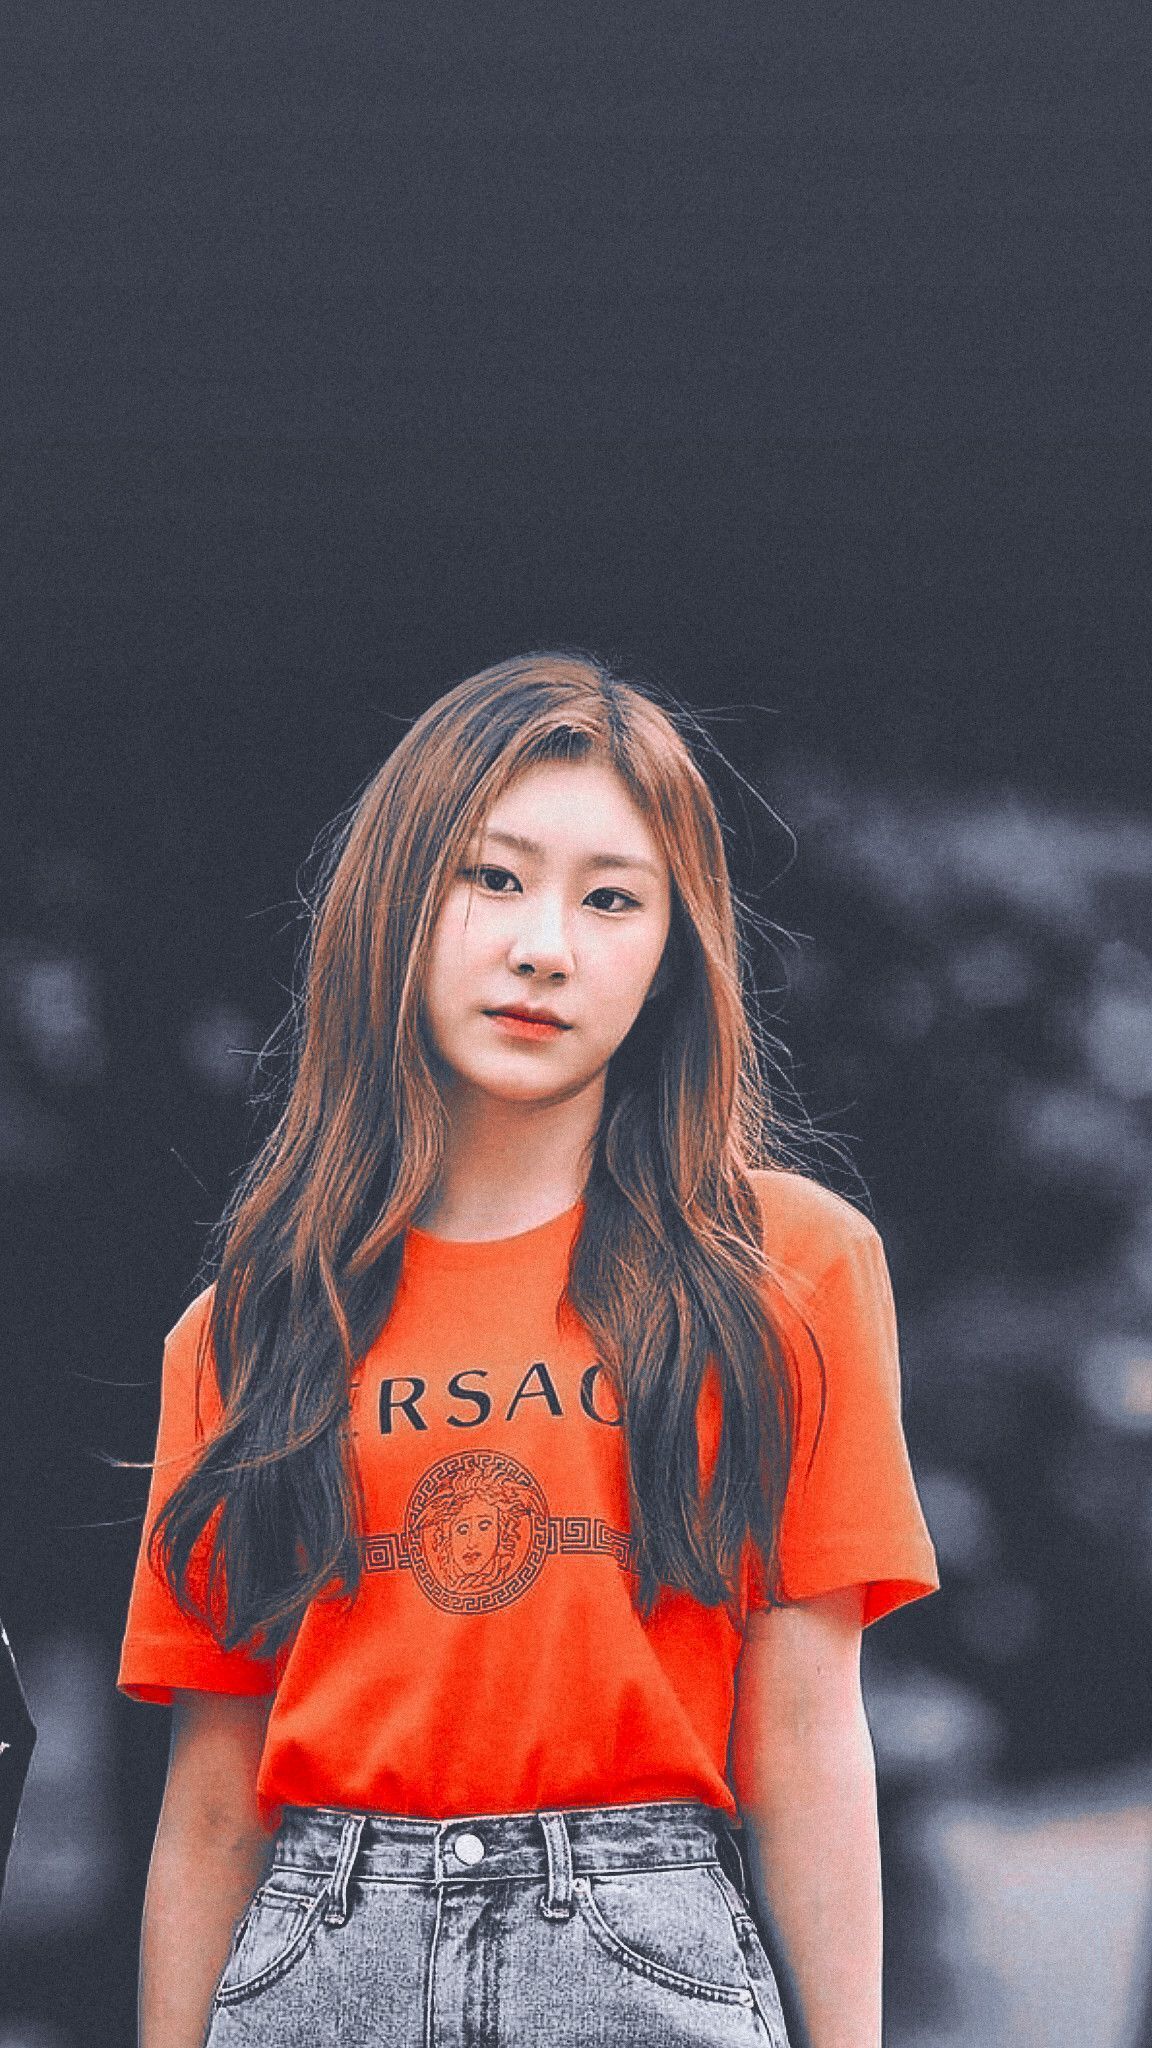 Itzy Chaeryeong Wallpaper Free Itzy Chaeryeong Background